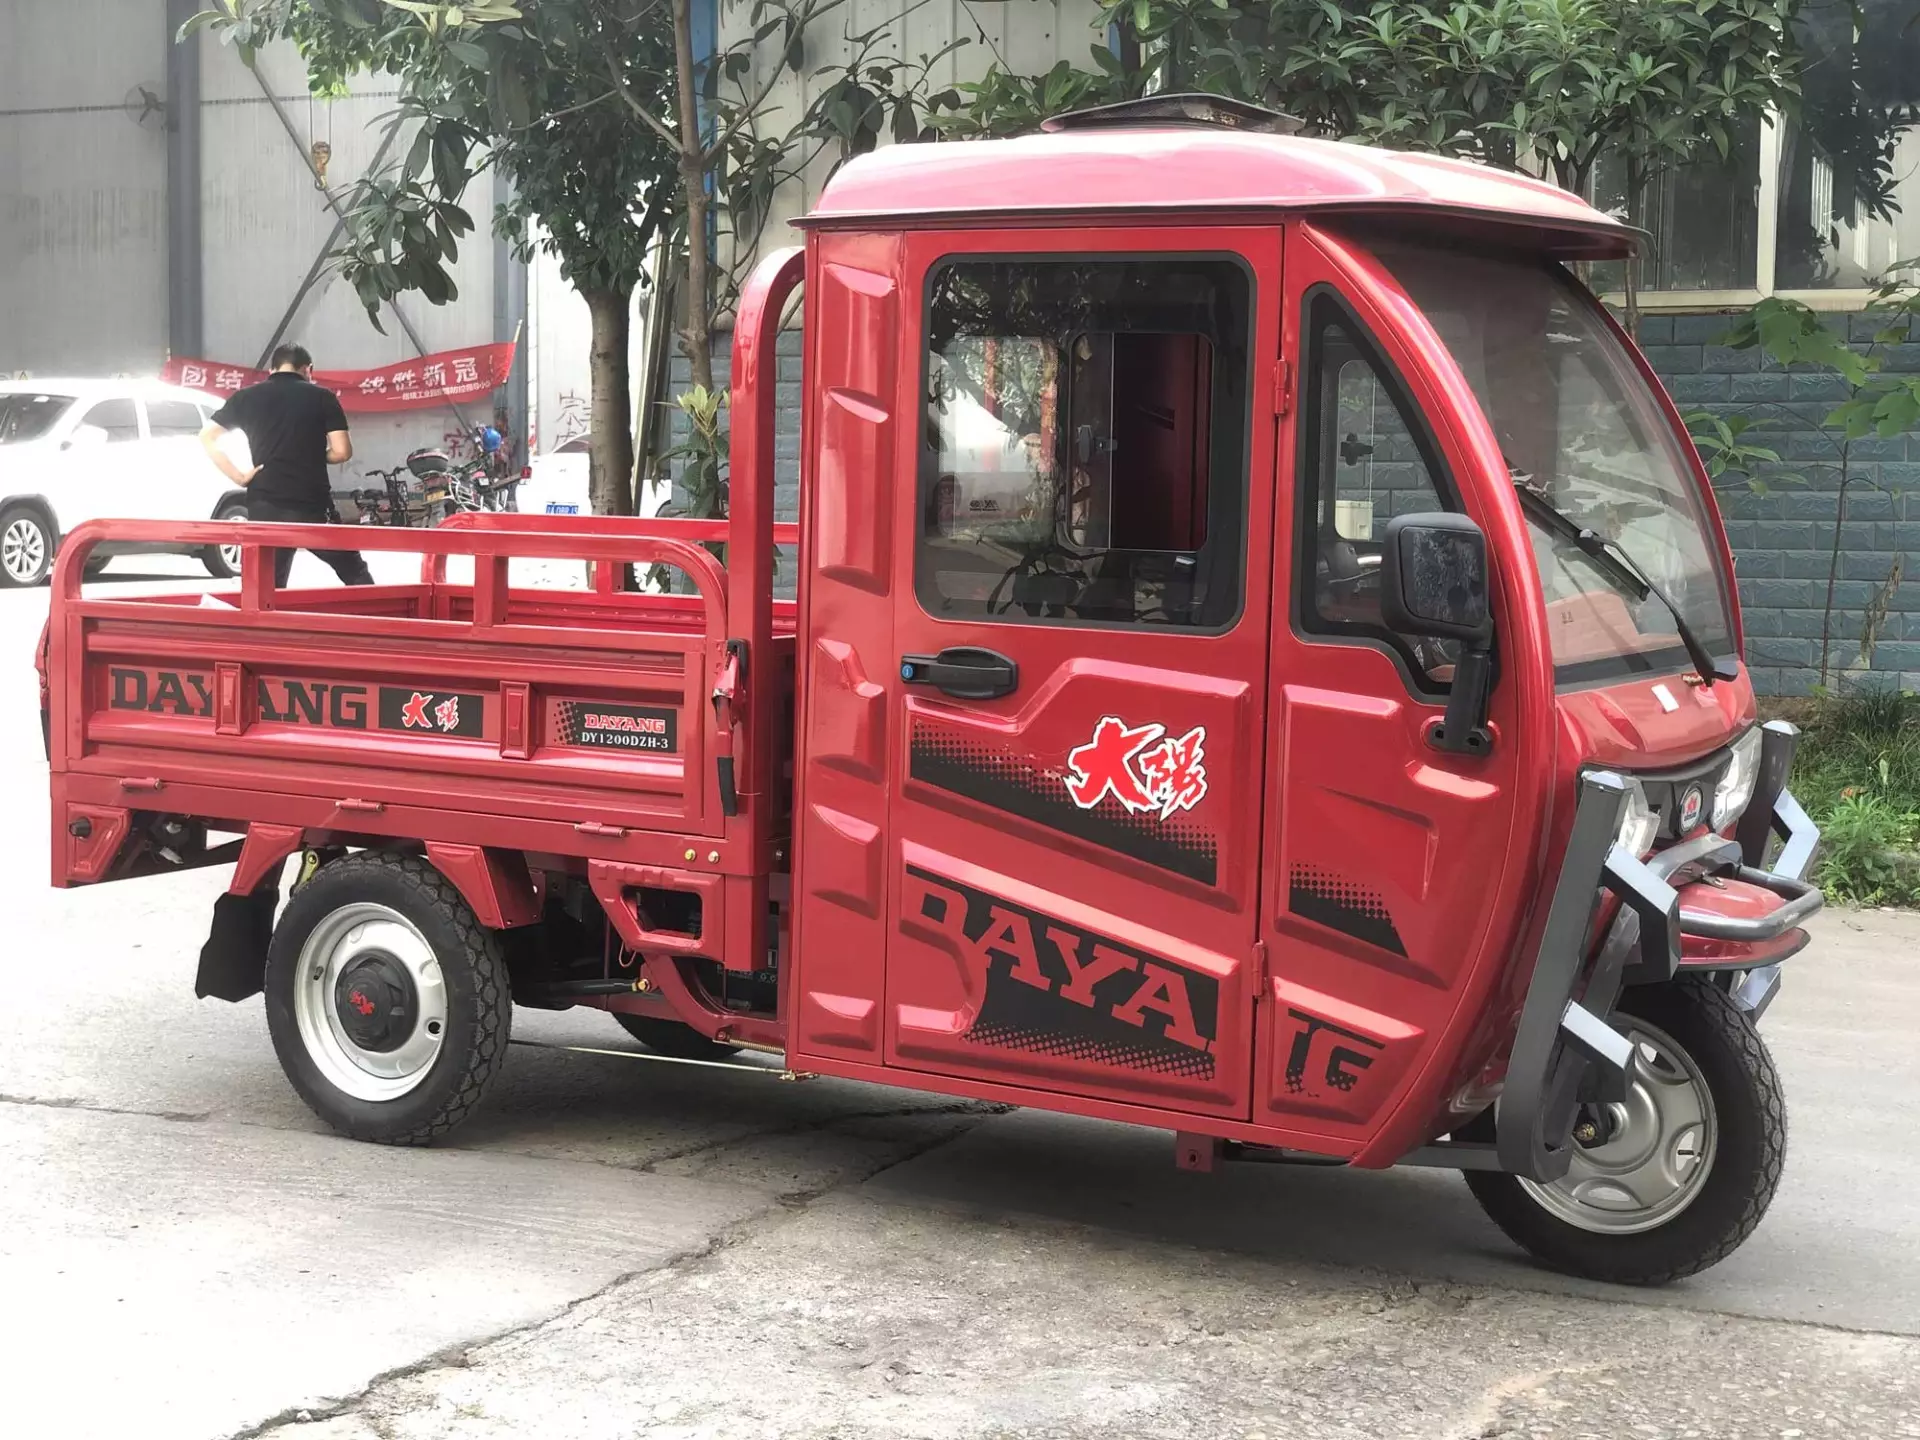 2021 Best Price Safe and Popular 60V 1000W 1200W 1500W enclosed Electric Tricycle for Cargo  DAYANG DY3-150 express delivery